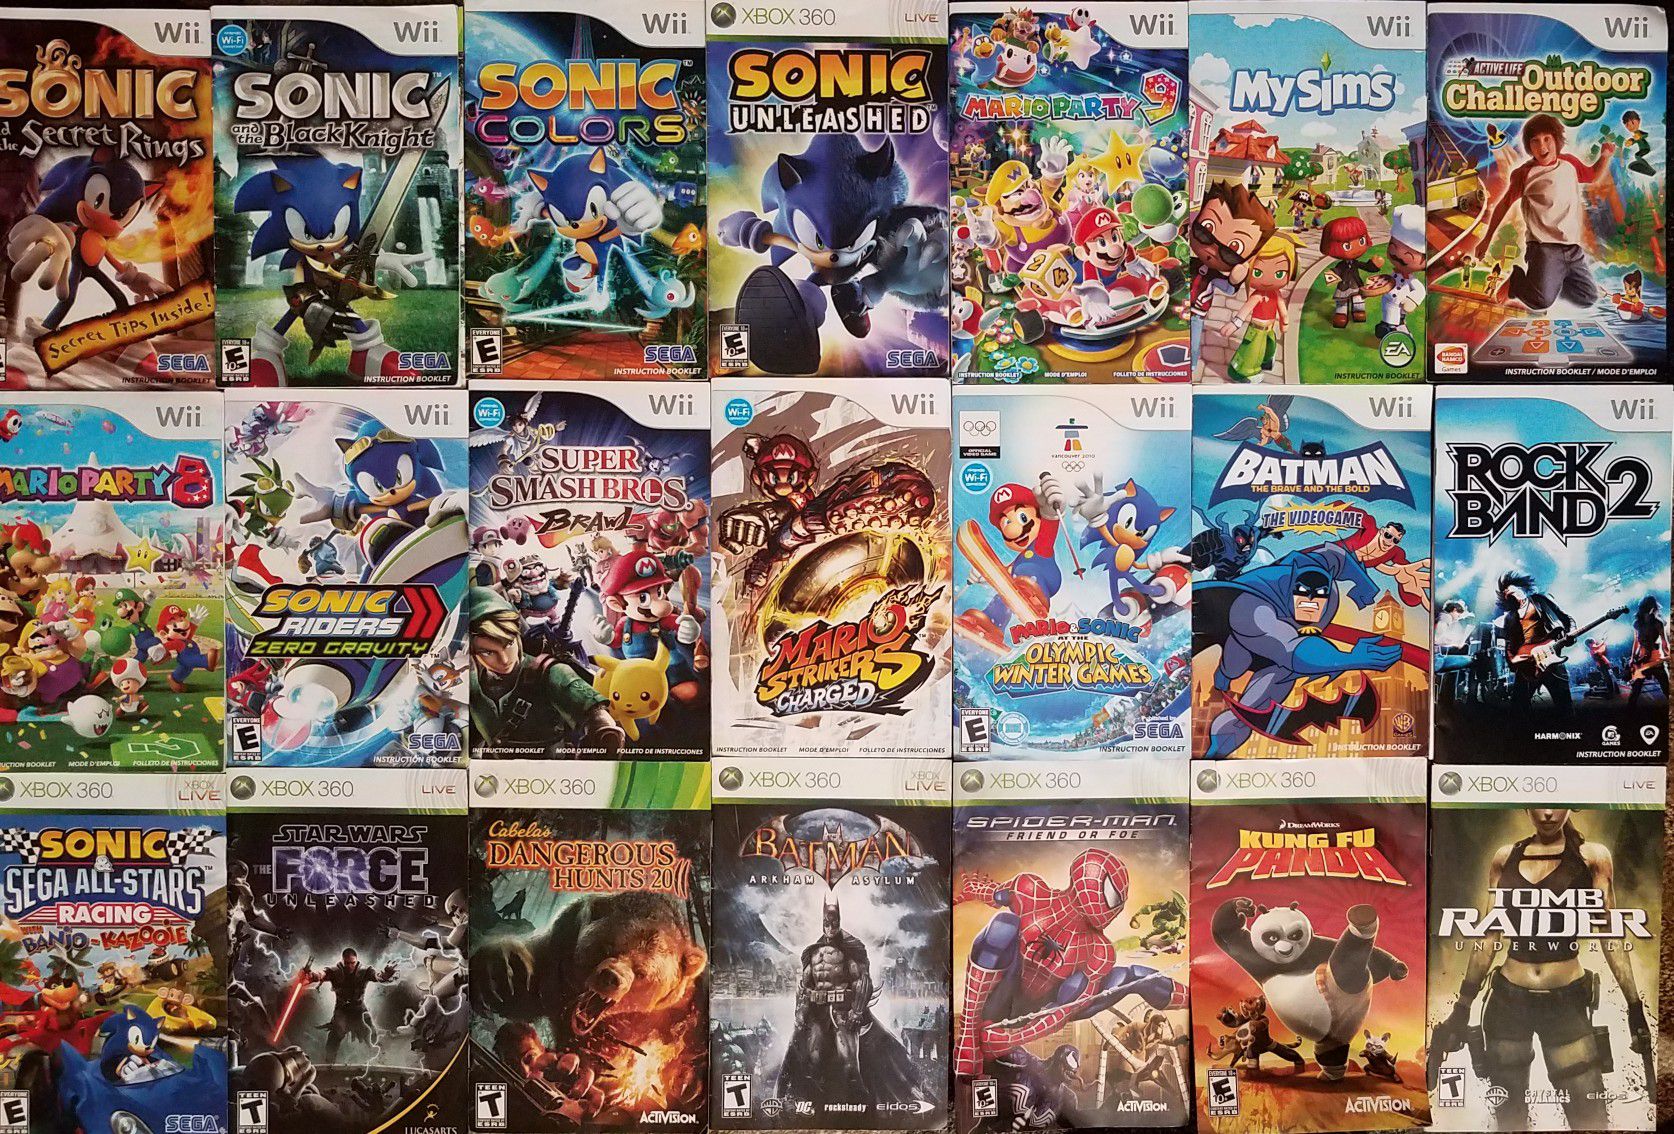 23 Wii Xbox Nintendo Game Instruction Booklet Manual 6 Sonic Rings Black Knight Unleashed Colors 5 Mario Party 8 9 Smash Strikers Star Wars